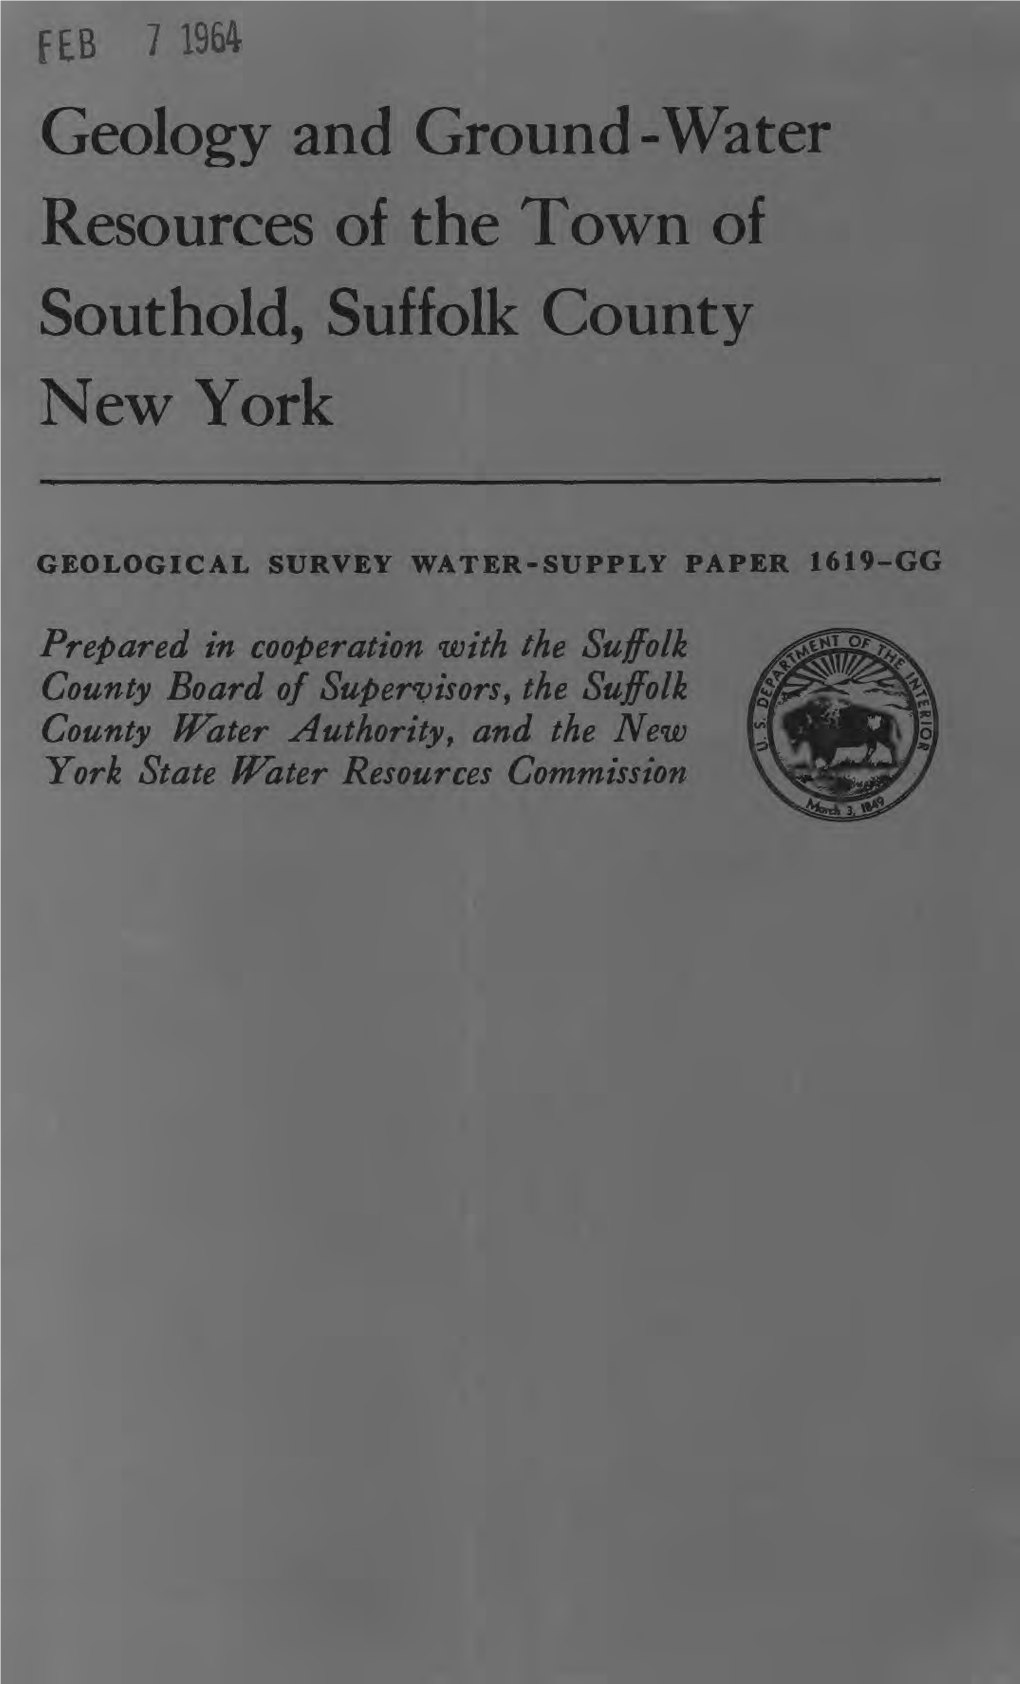 Geology and Ground-Water Resources of the Town of Southold, Suffolk County New York